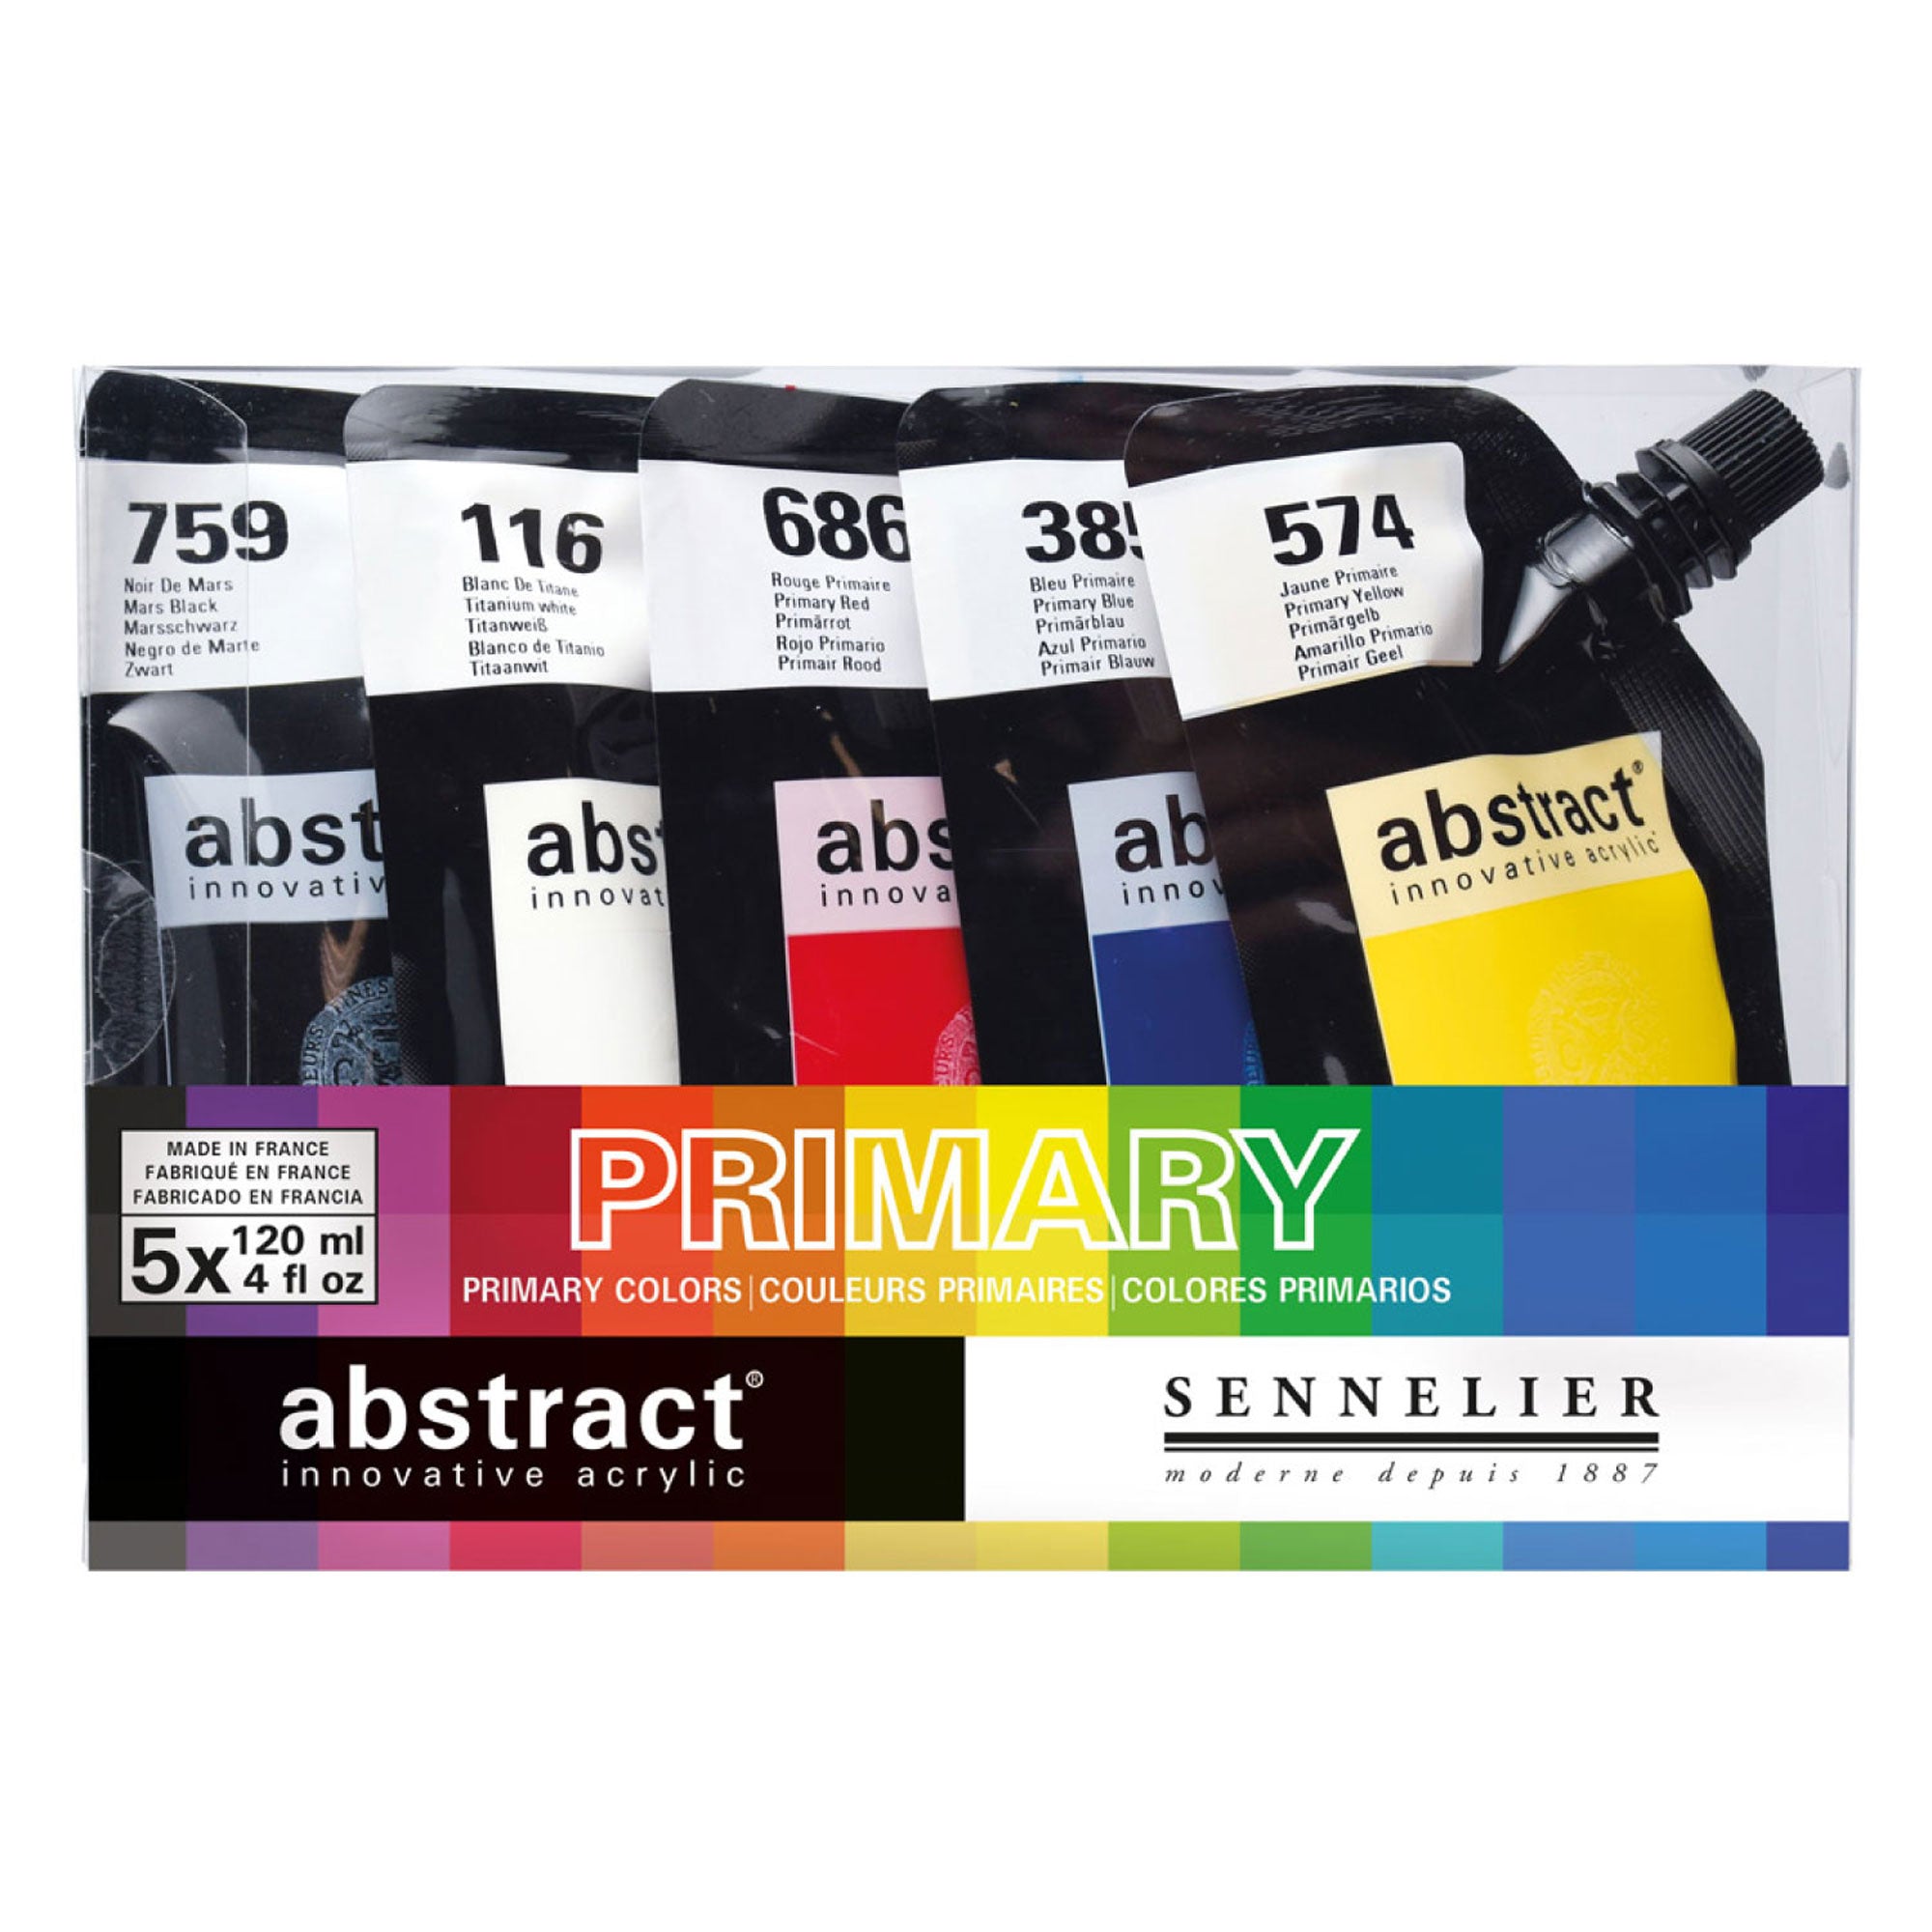 Sennelier Abstract Acrylic Paint Pouches - 5 x 120ml - Primary Set